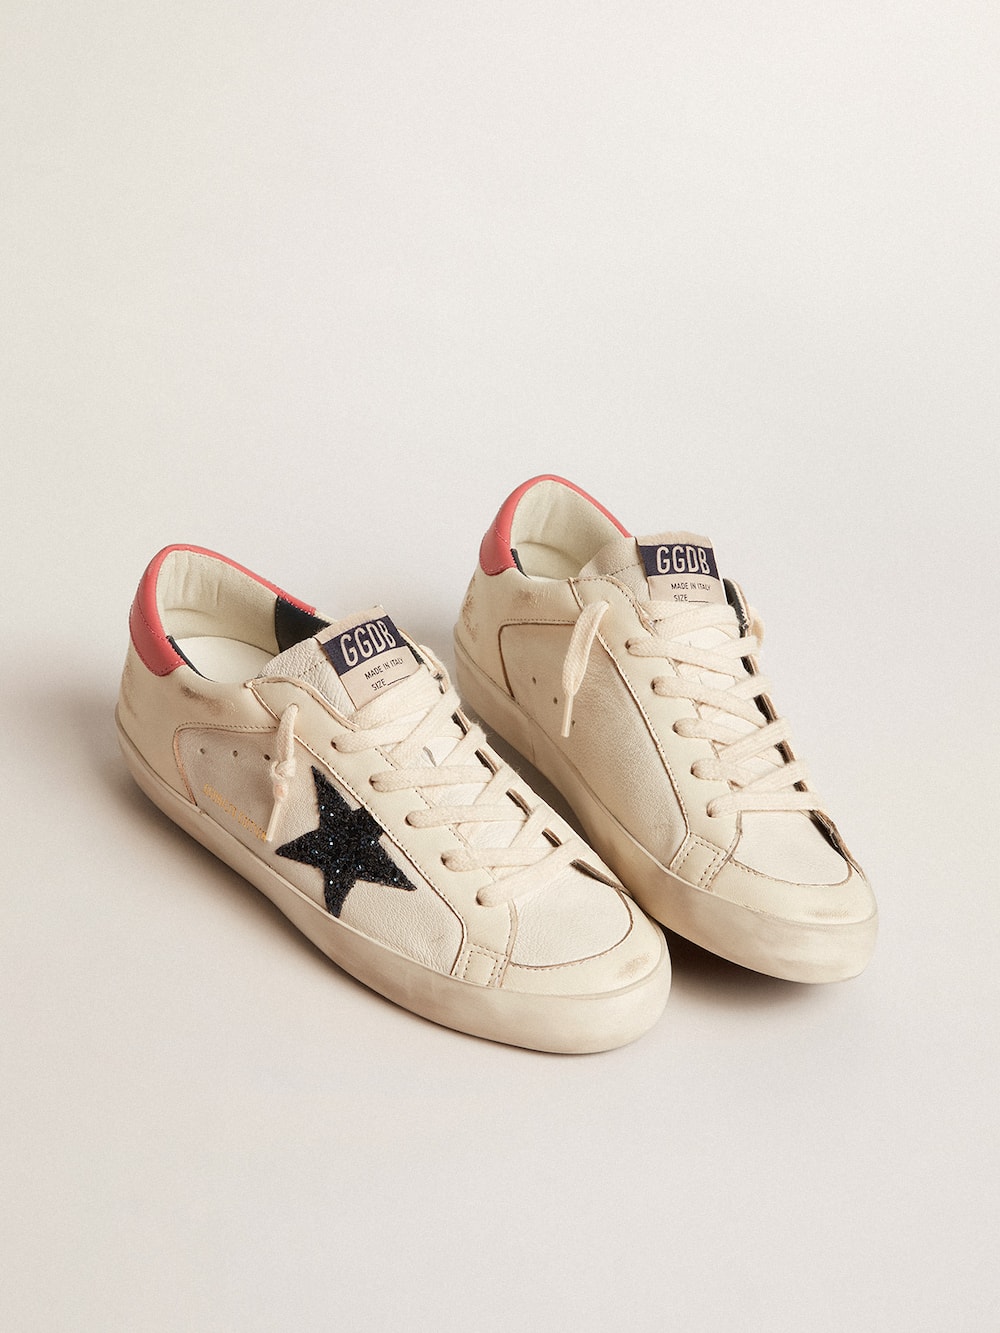 Golden Goose - Women's Super-Star LTD in nappa with blue glitter star and red heel tab in 